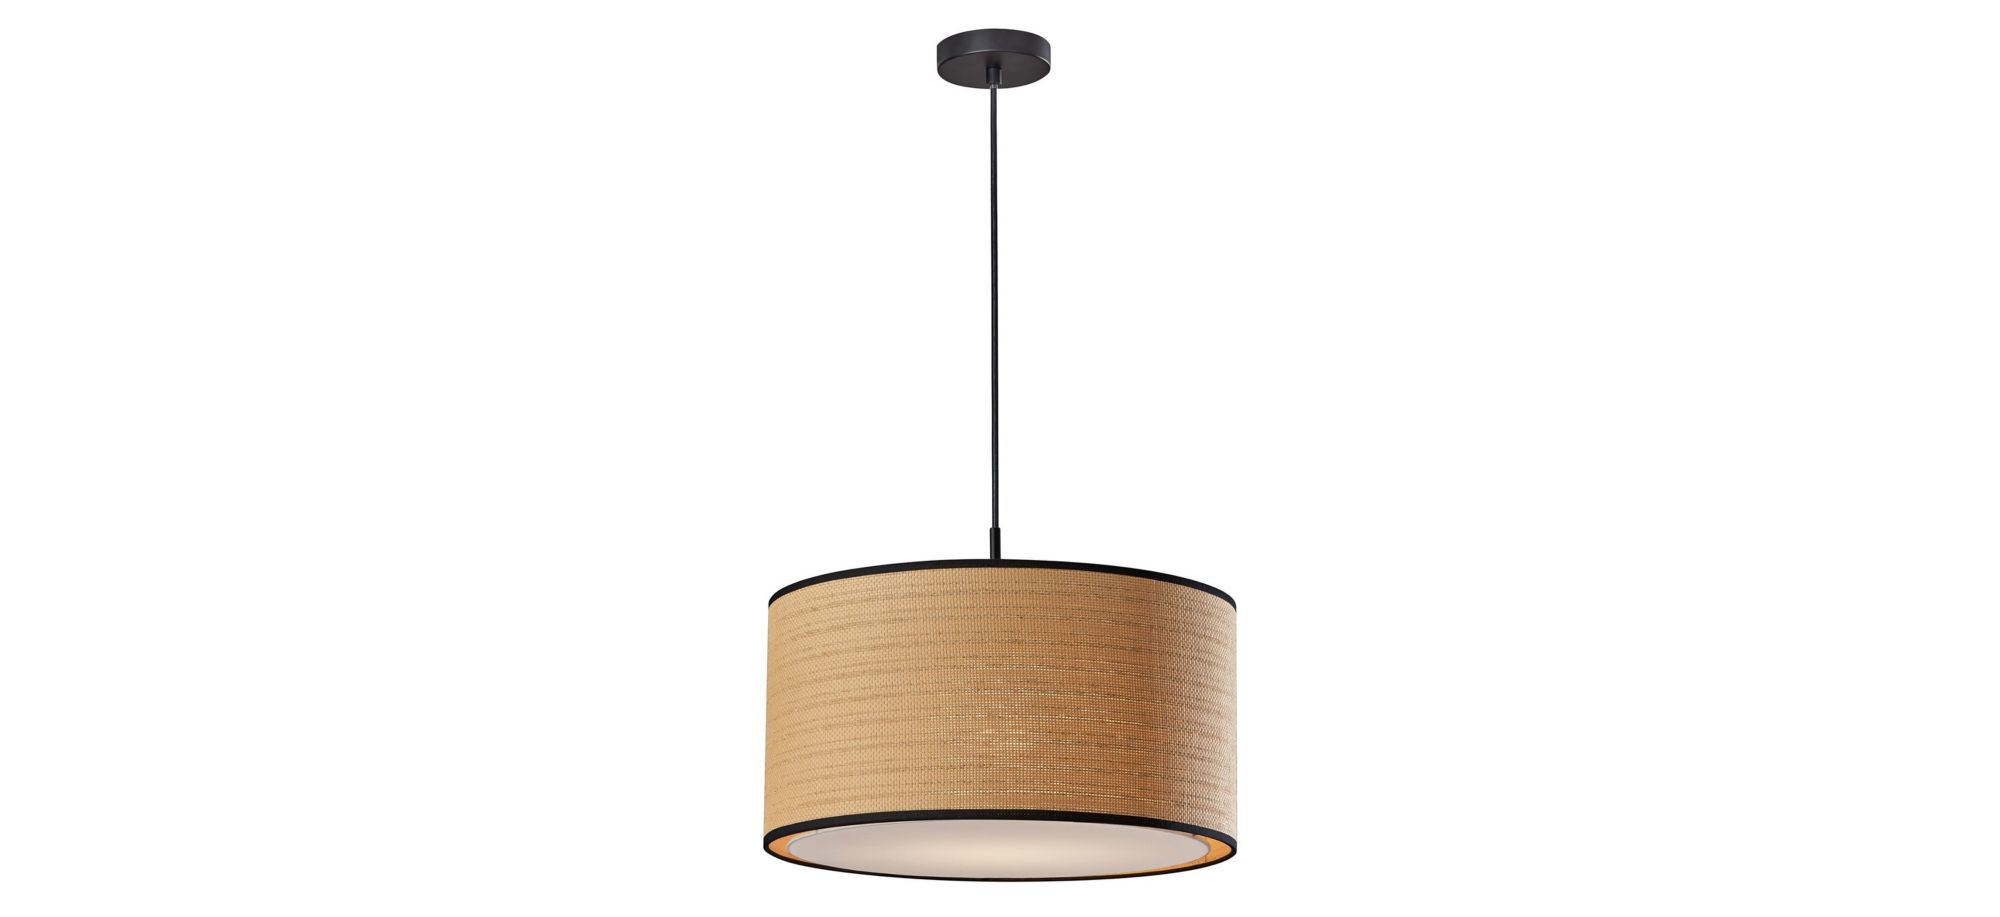 Harvest Large Pendant Light in Black by Adesso Inc